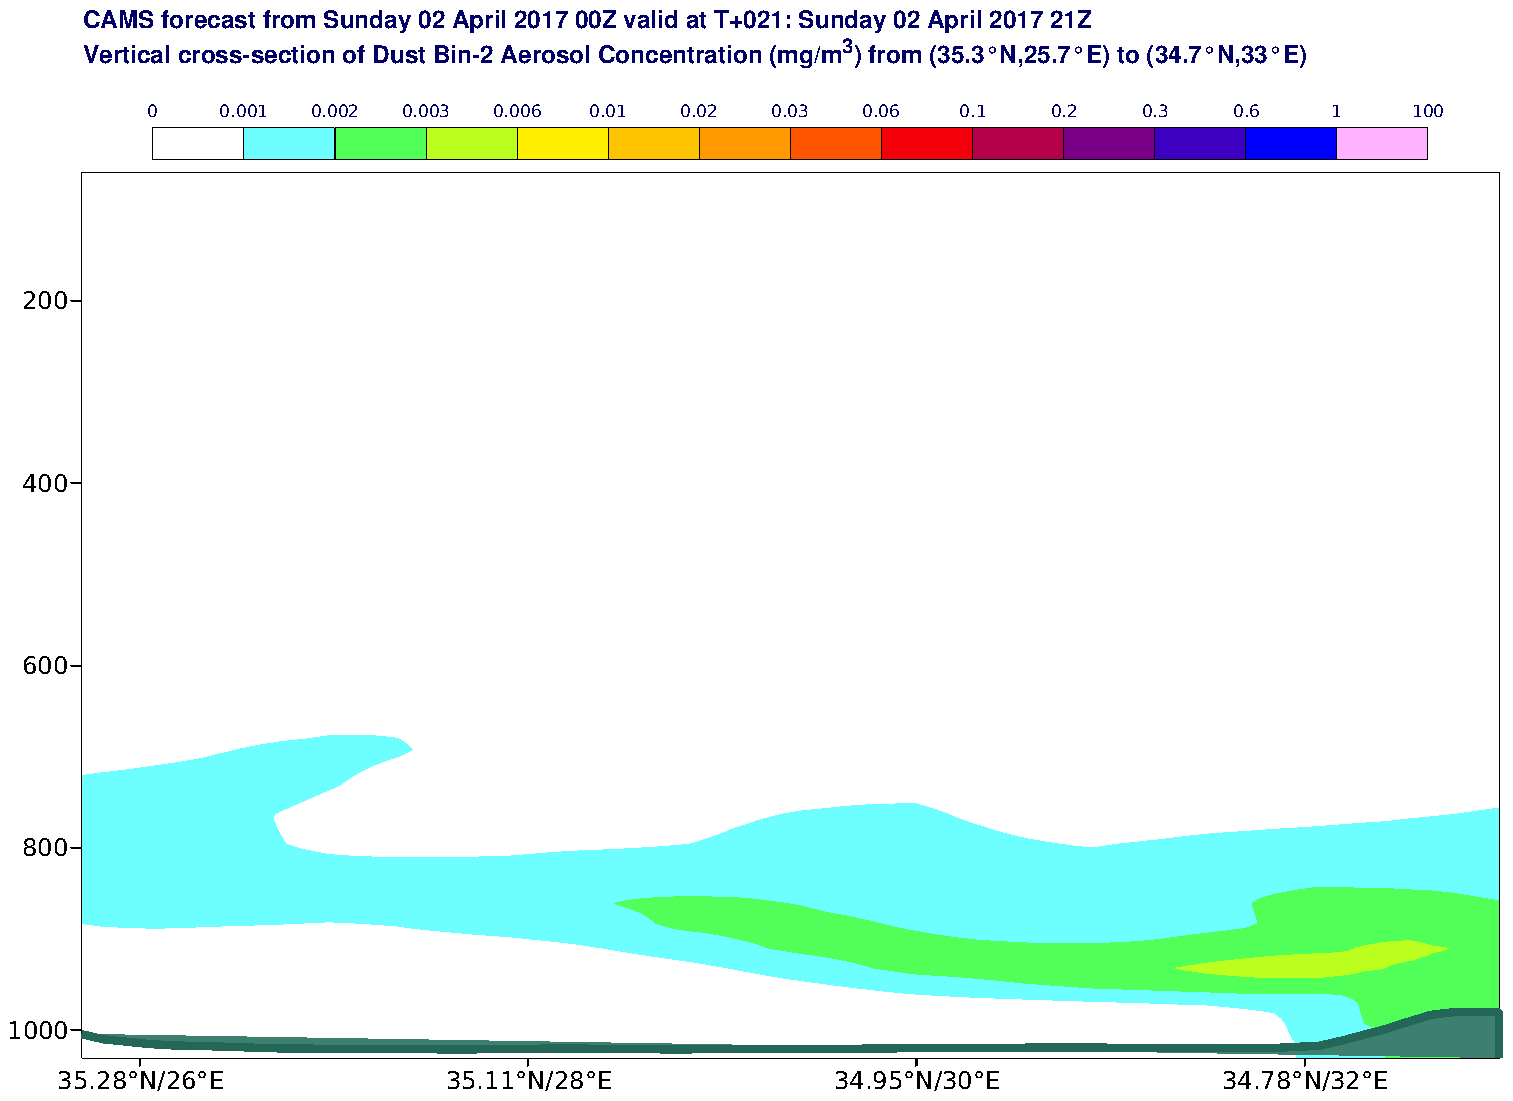 Vertical cross-section of Dust Bin-2 Aerosol Concentration (mg/m3) valid at T21 - 2017-04-02 21:00